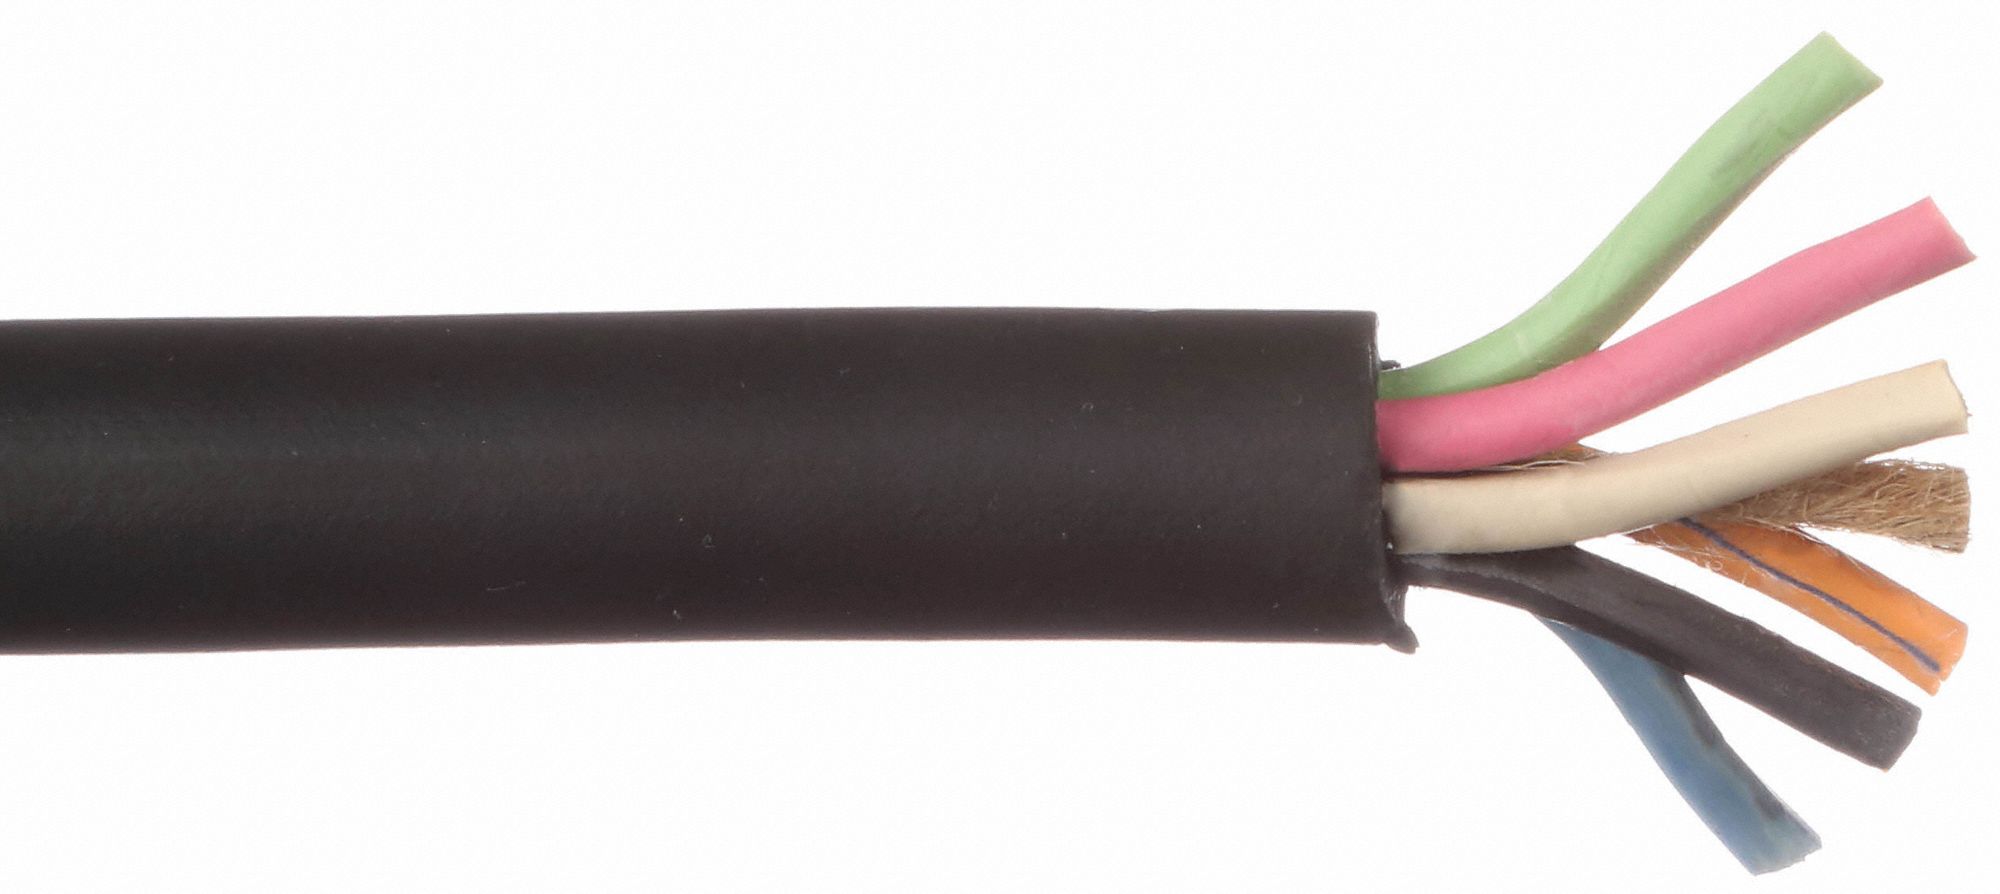 Awg 16 Copper Wire 2 Pin, 6 Gauge Awg Wire Cable